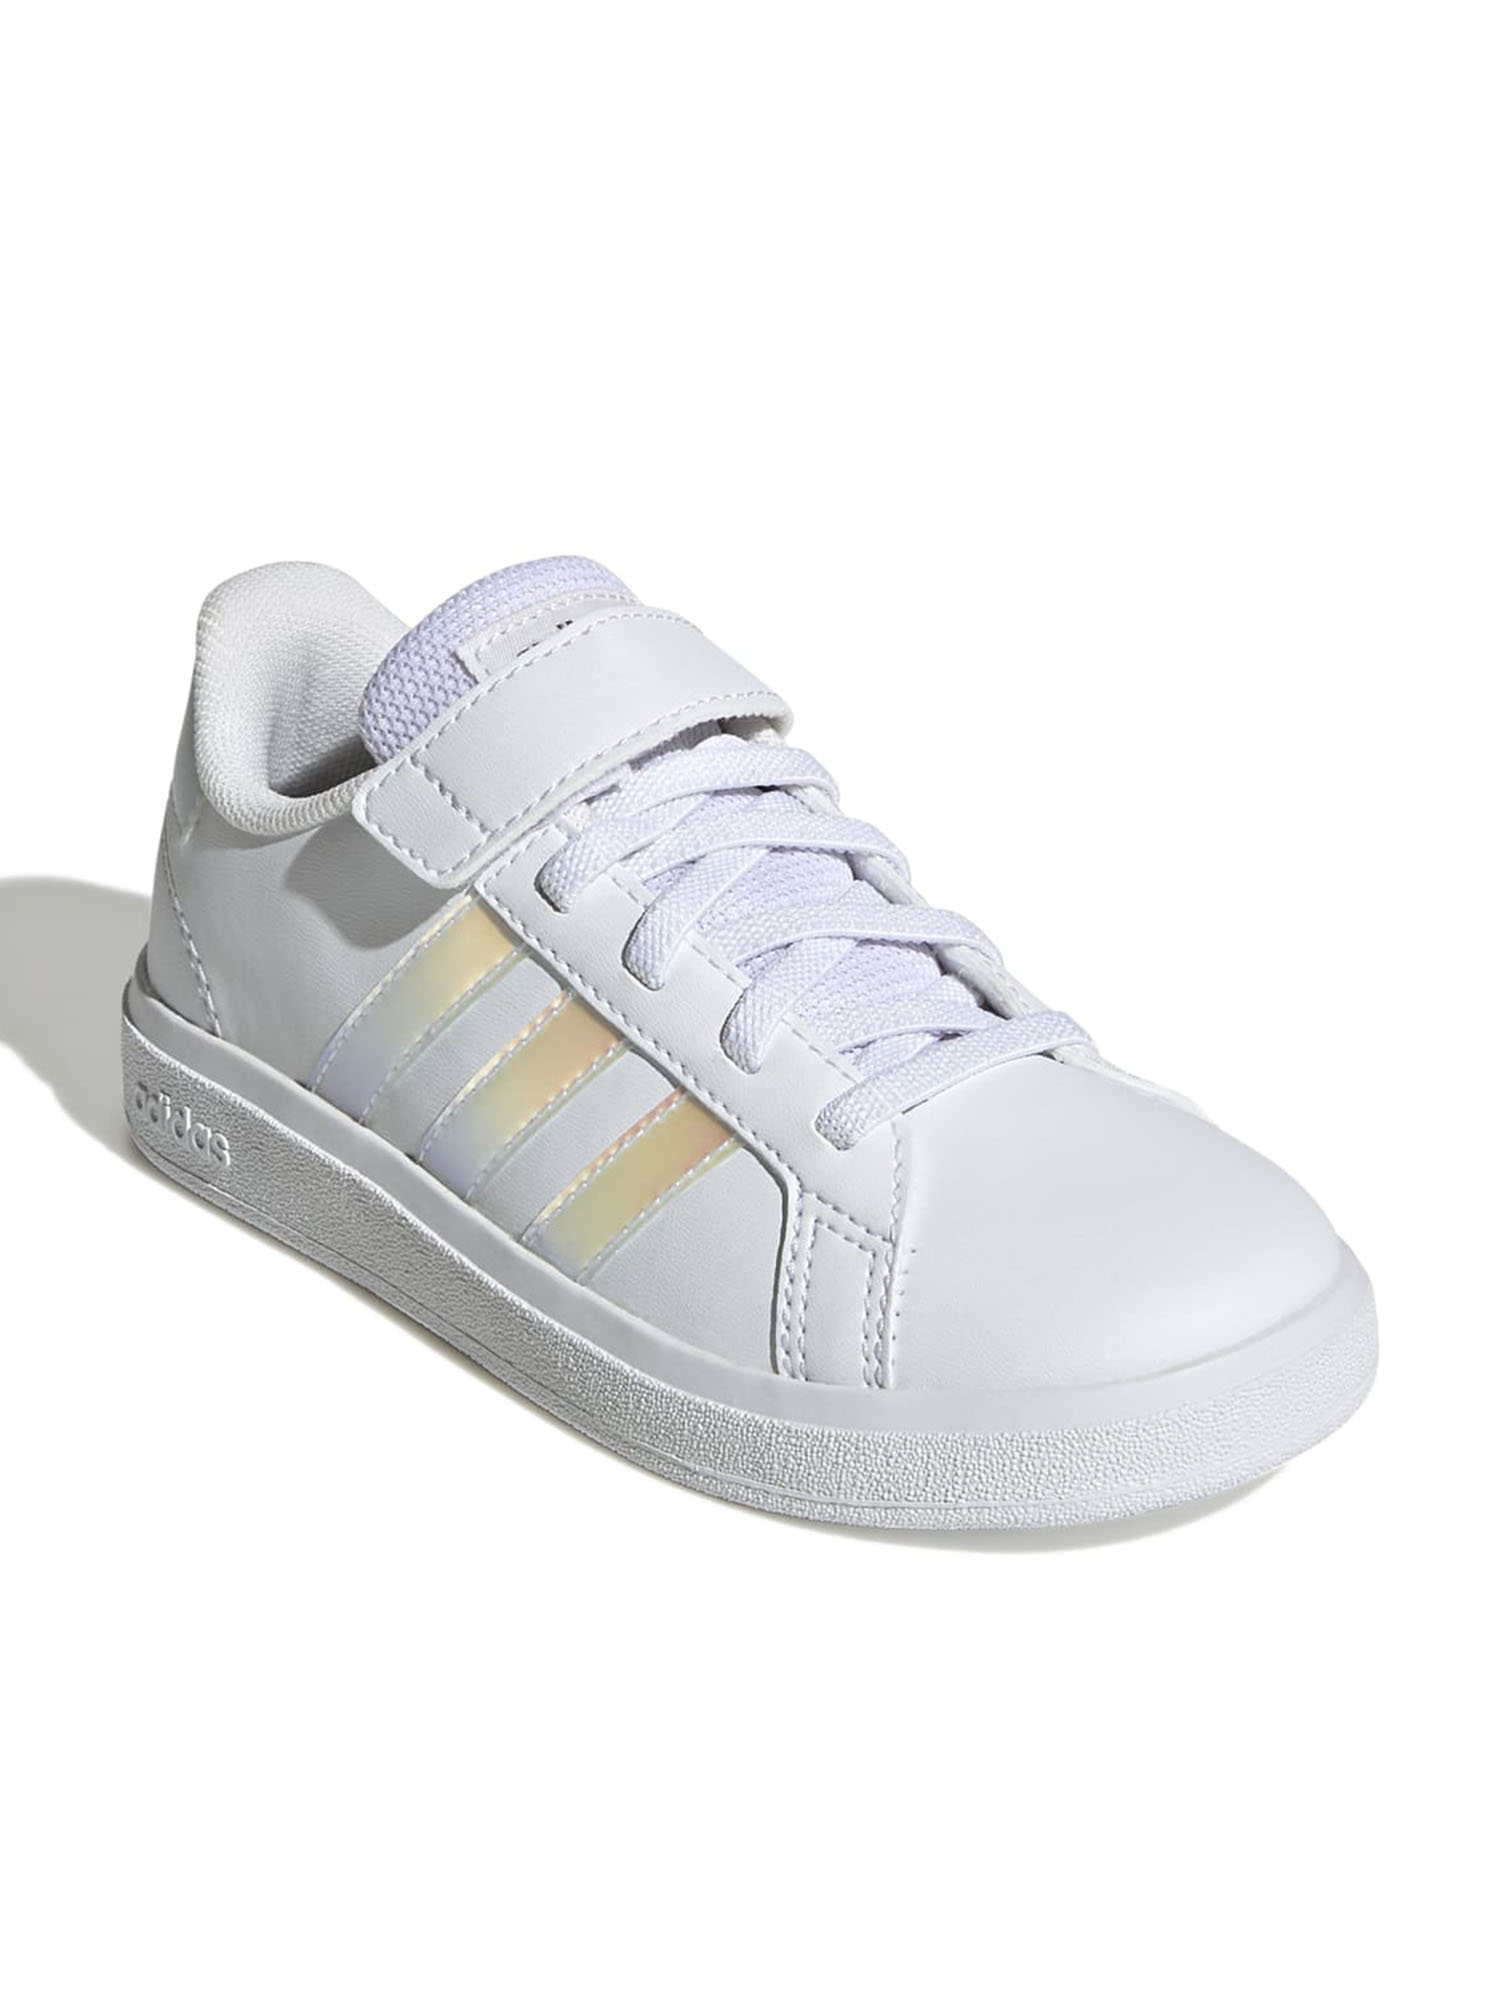 SNEAKERS PS ADIDAS GRAND COURT 2 BIANCO